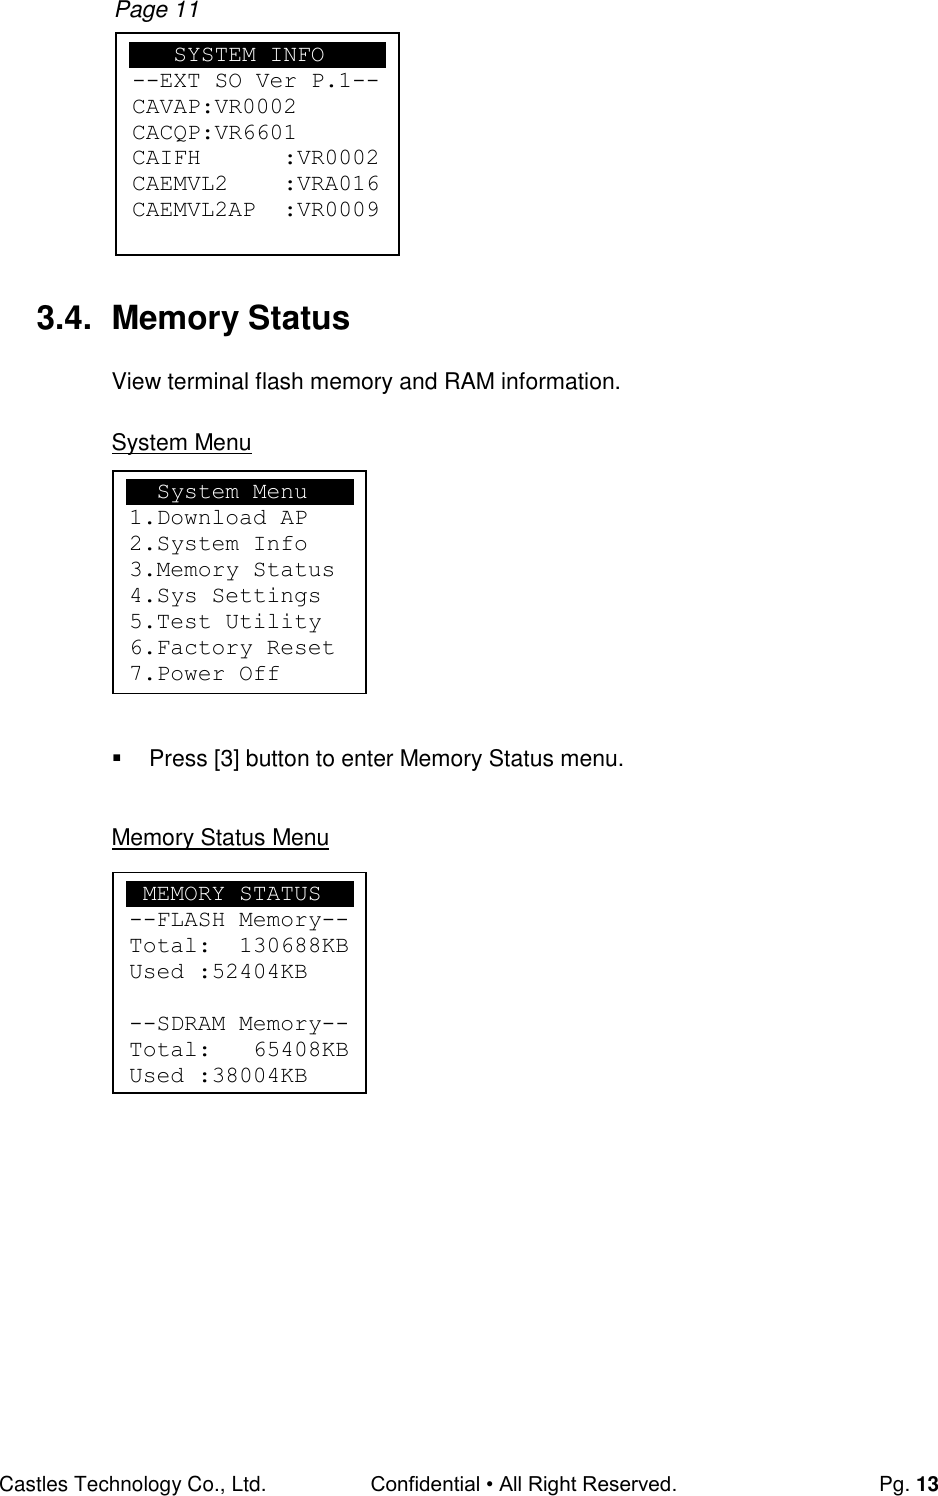 Castles Technology Co., Ltd. Confidential • All Right Reserved.  Pg. 13  Page 11         3.4.  Memory Status View terminal flash memory and RAM information.  System Menu          Press [3] button to enter Memory Status menu.  Memory Status Menu            System Menu 1.Download AP 2.System Info 3.Memory Status 4.Sys Settings 5.Test Utility 6.Factory Reset 7.Power Off  MEMORY STATUS --FLASH Memory-- Total:  130688KB Used :52404KB  --SDRAM Memory-- Total:   65408KB Used :38004KB     SYSTEM INFO --EXT SO Ver P.1-- CAVAP:VR0002 CACQP:VR6601 CAIFH      :VR0002 CAEMVL2    :VRA016 CAEMVL2AP  :VR0009   